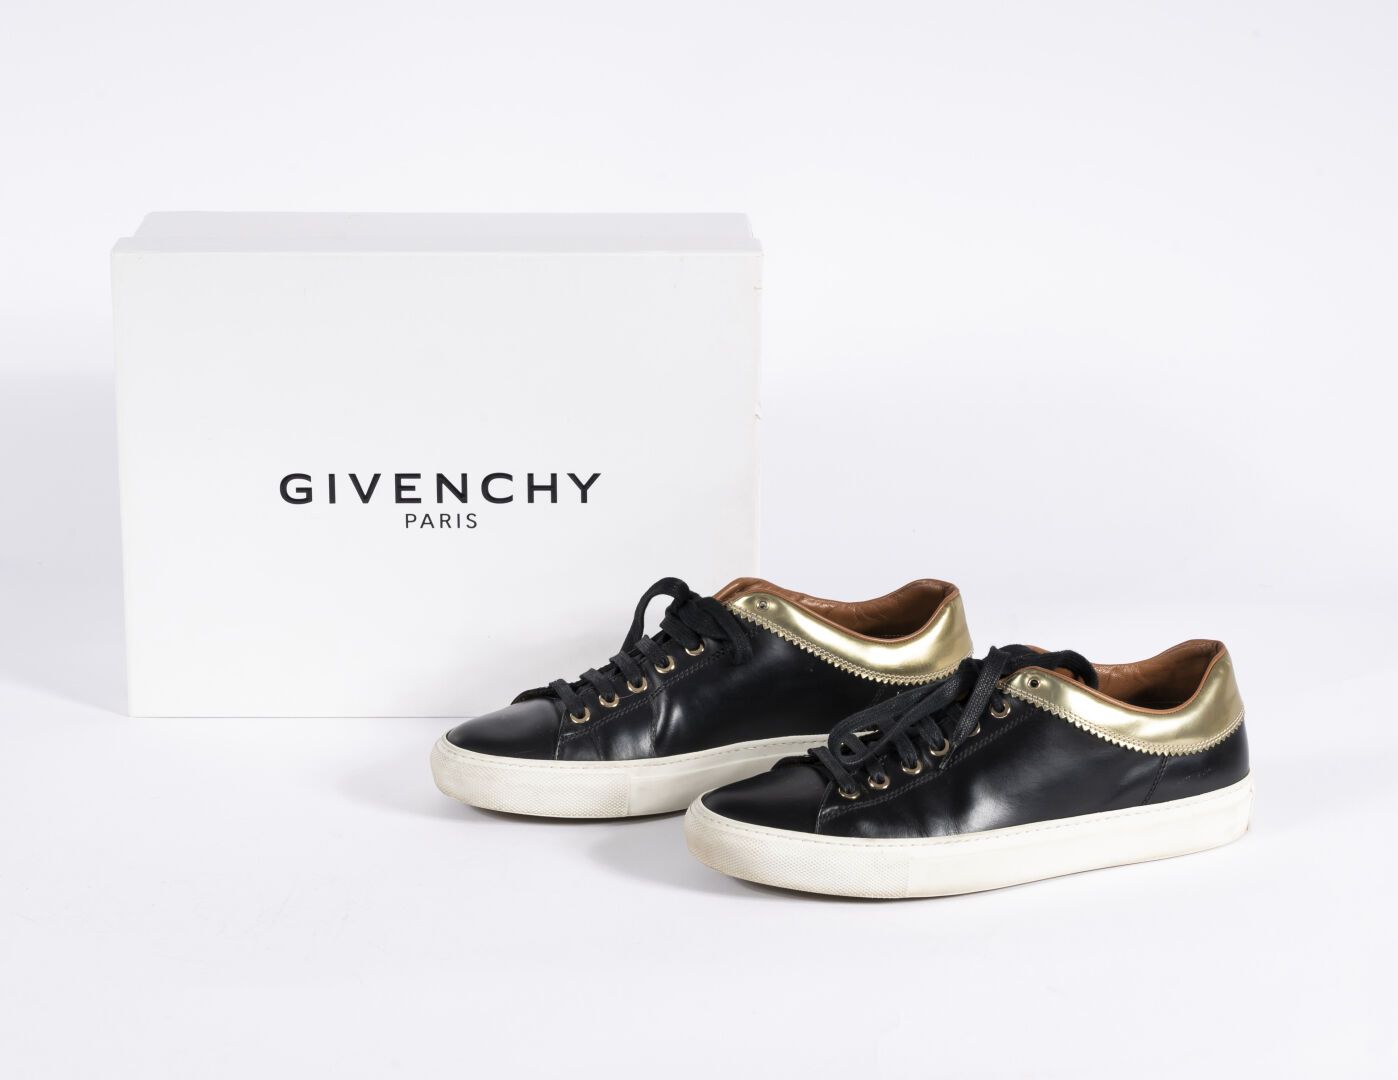 GIVENCHY Pair of black and gold patent leather sneakers
Size 40

Good condition,&hellip;